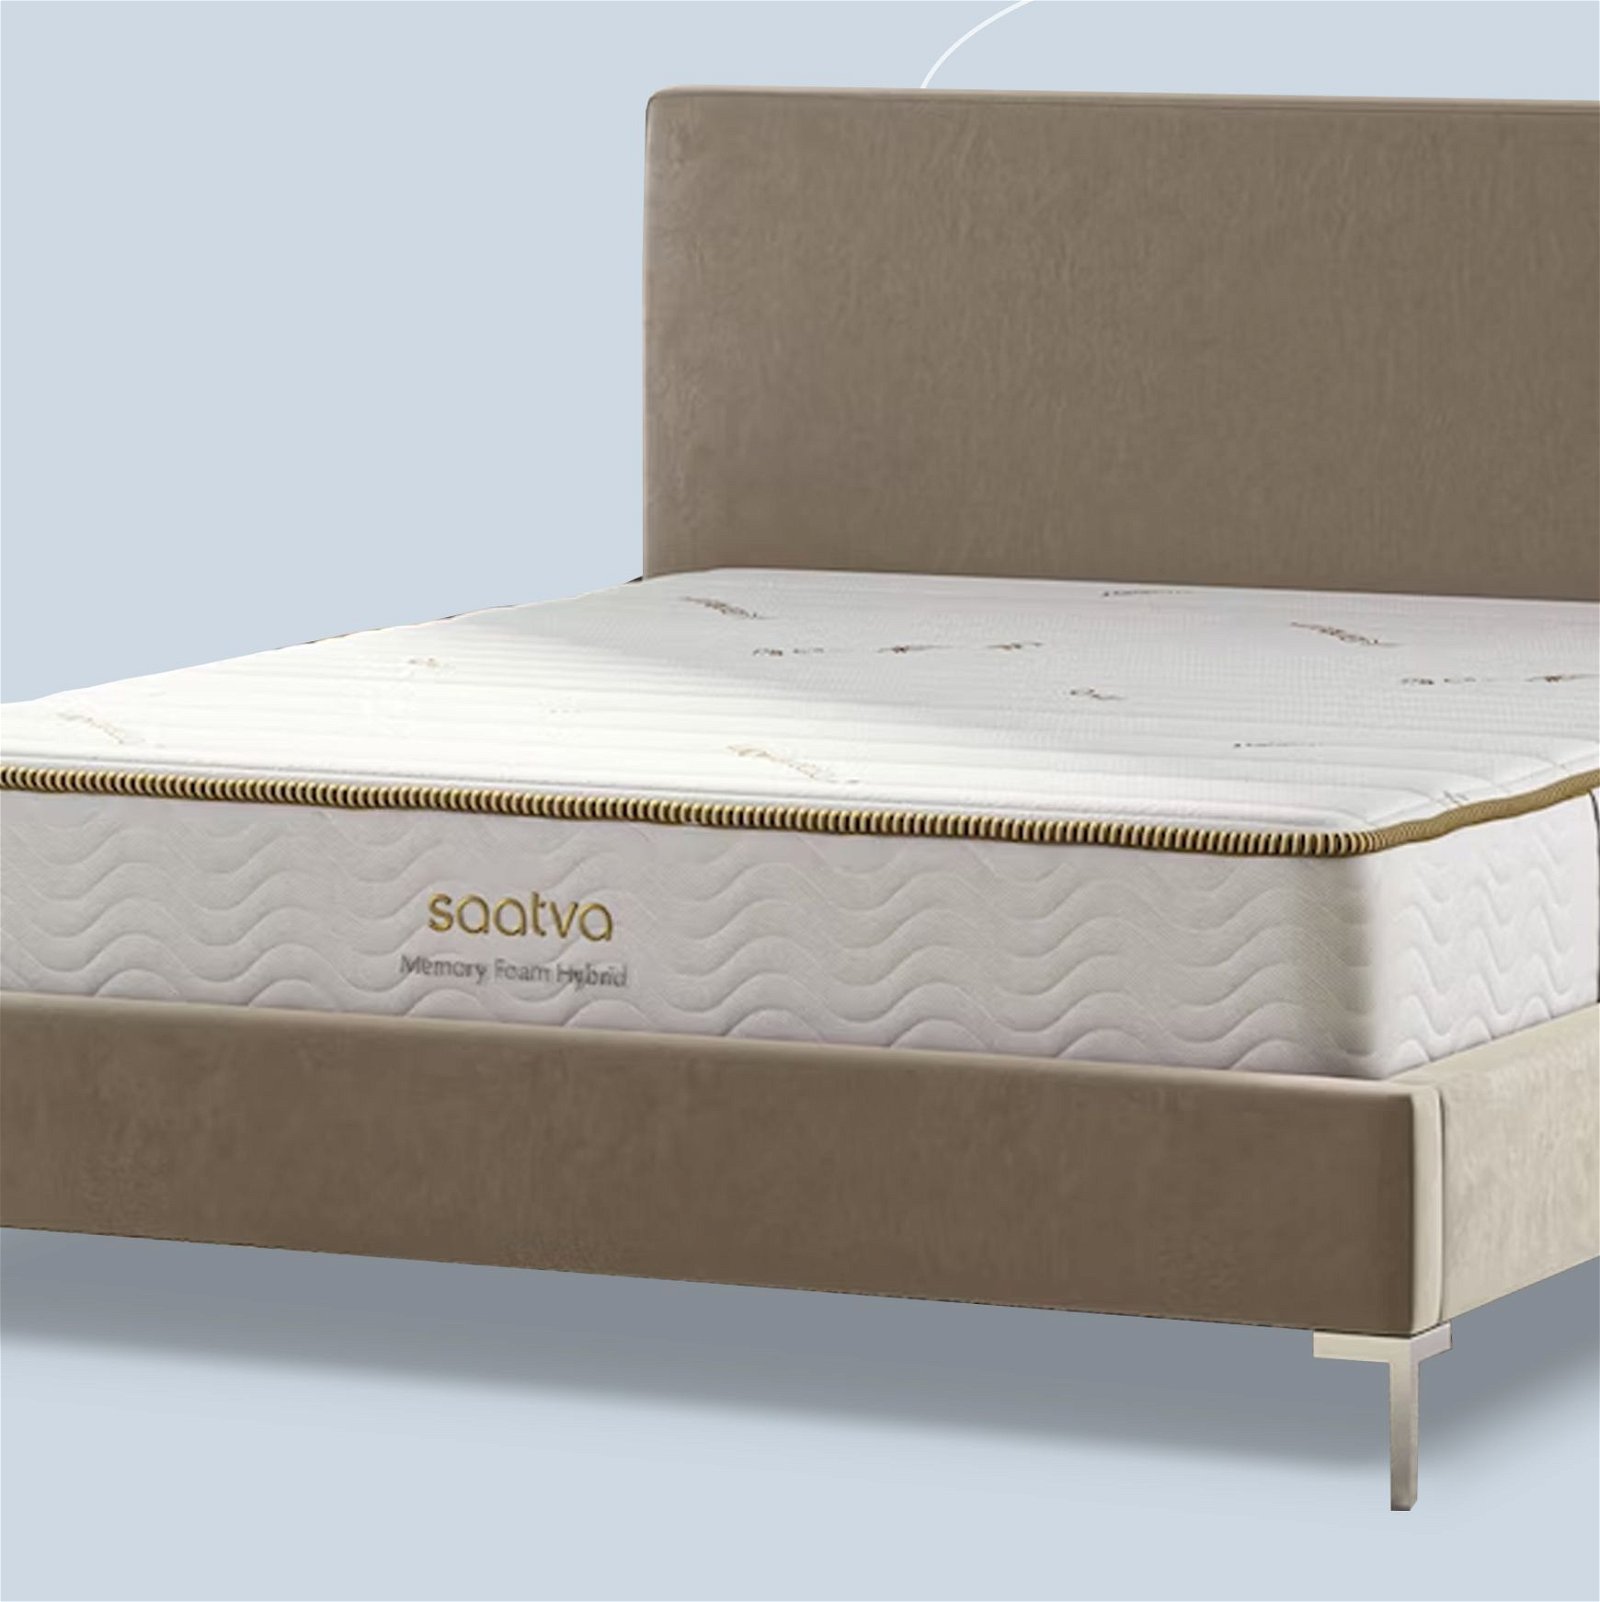 Our Favorite Mattress Is Now 20% Off